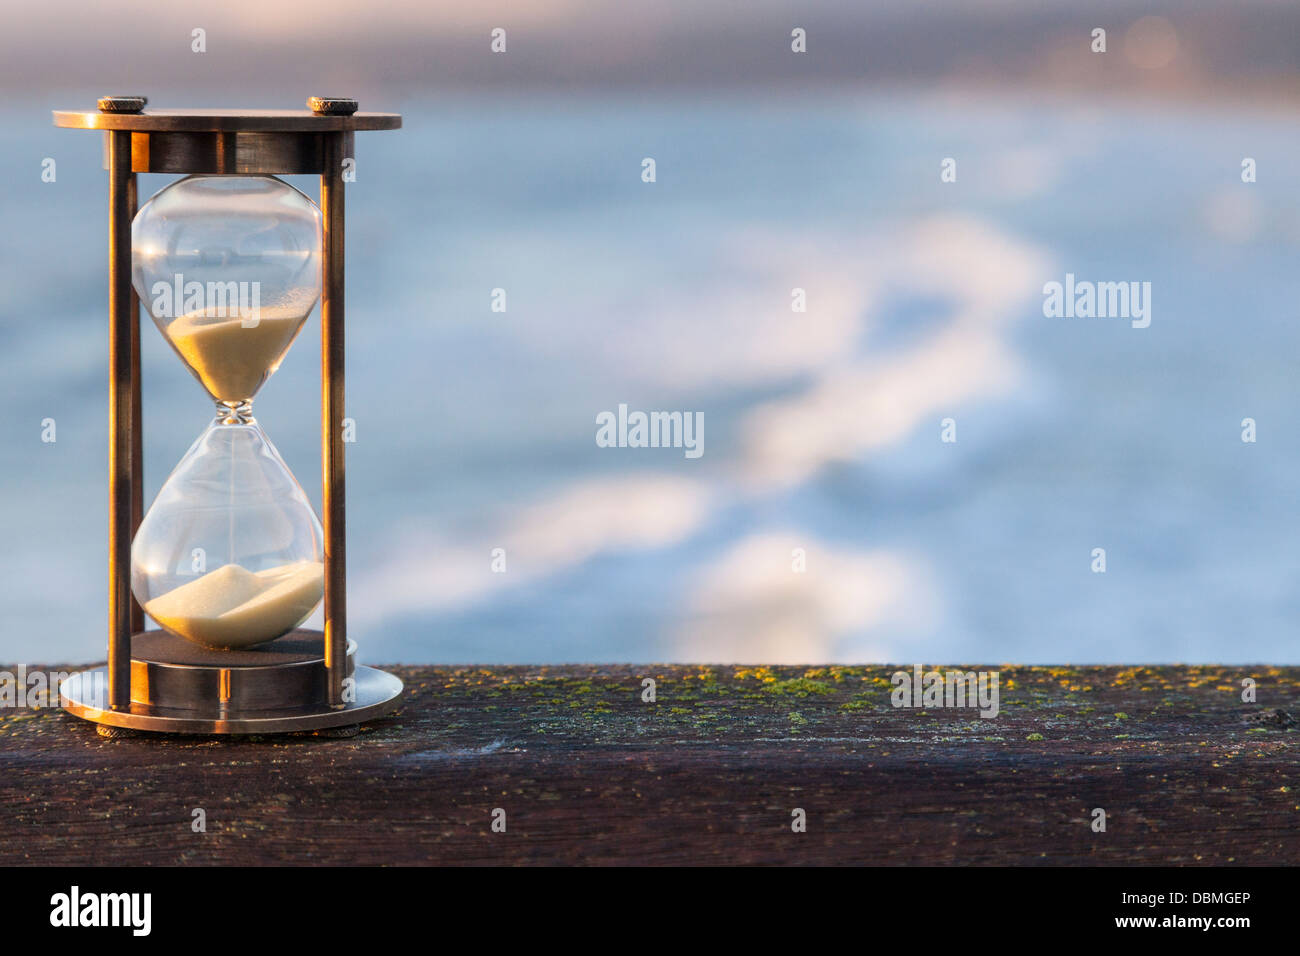 Hourglass Outdoors - sunlit hourglass or sand timer with a background of flowing water. Stock Photo